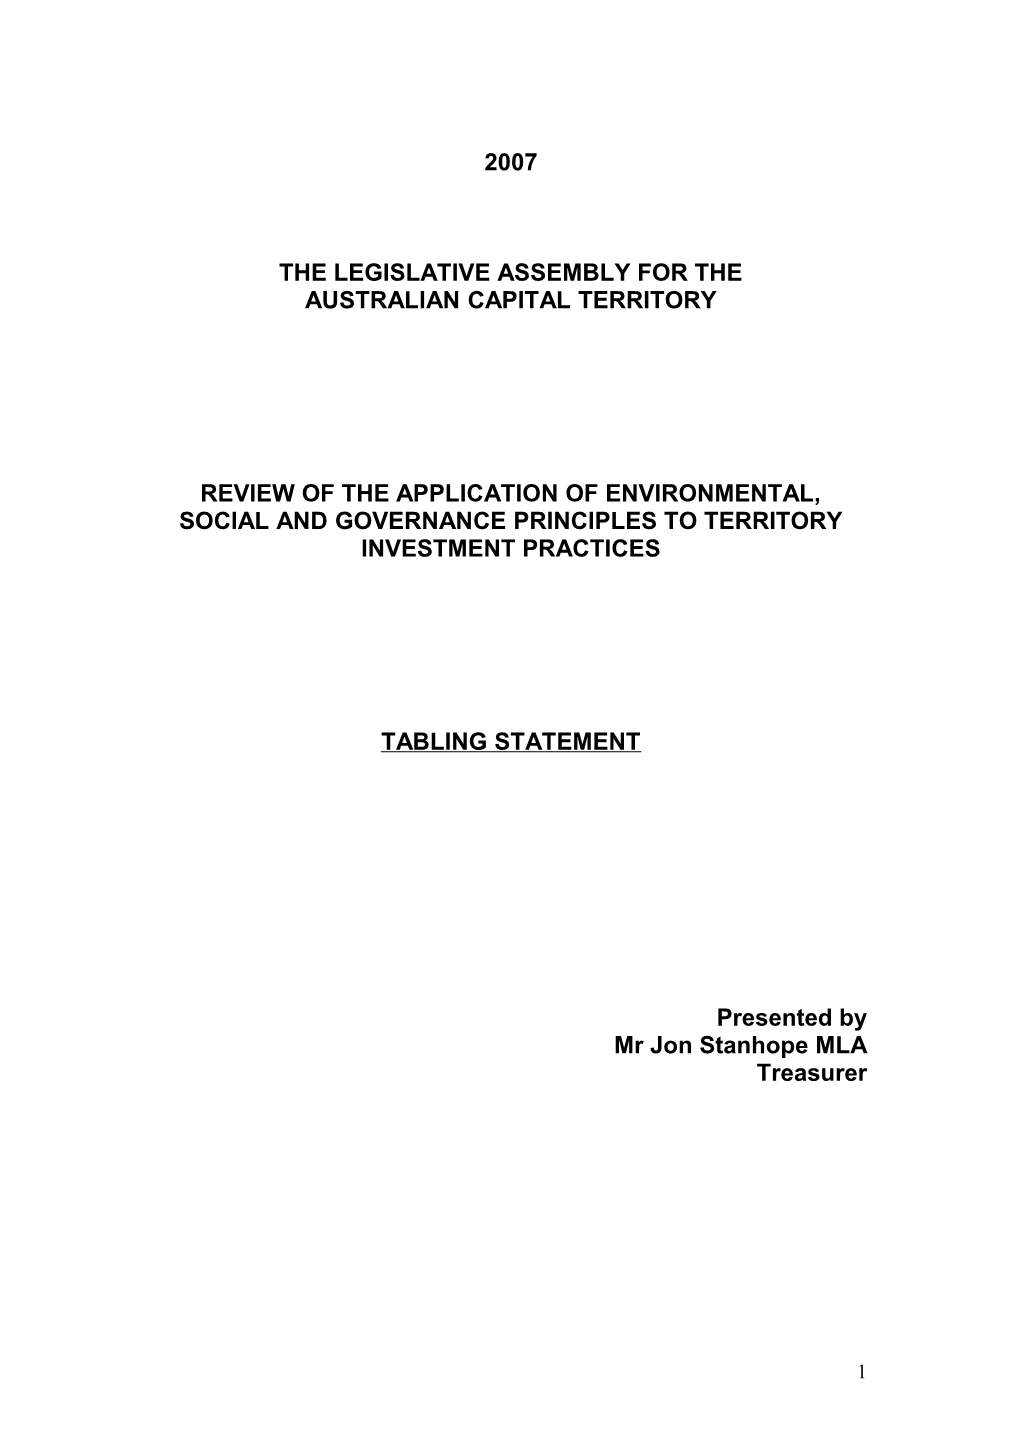 Ministerial Statement Template